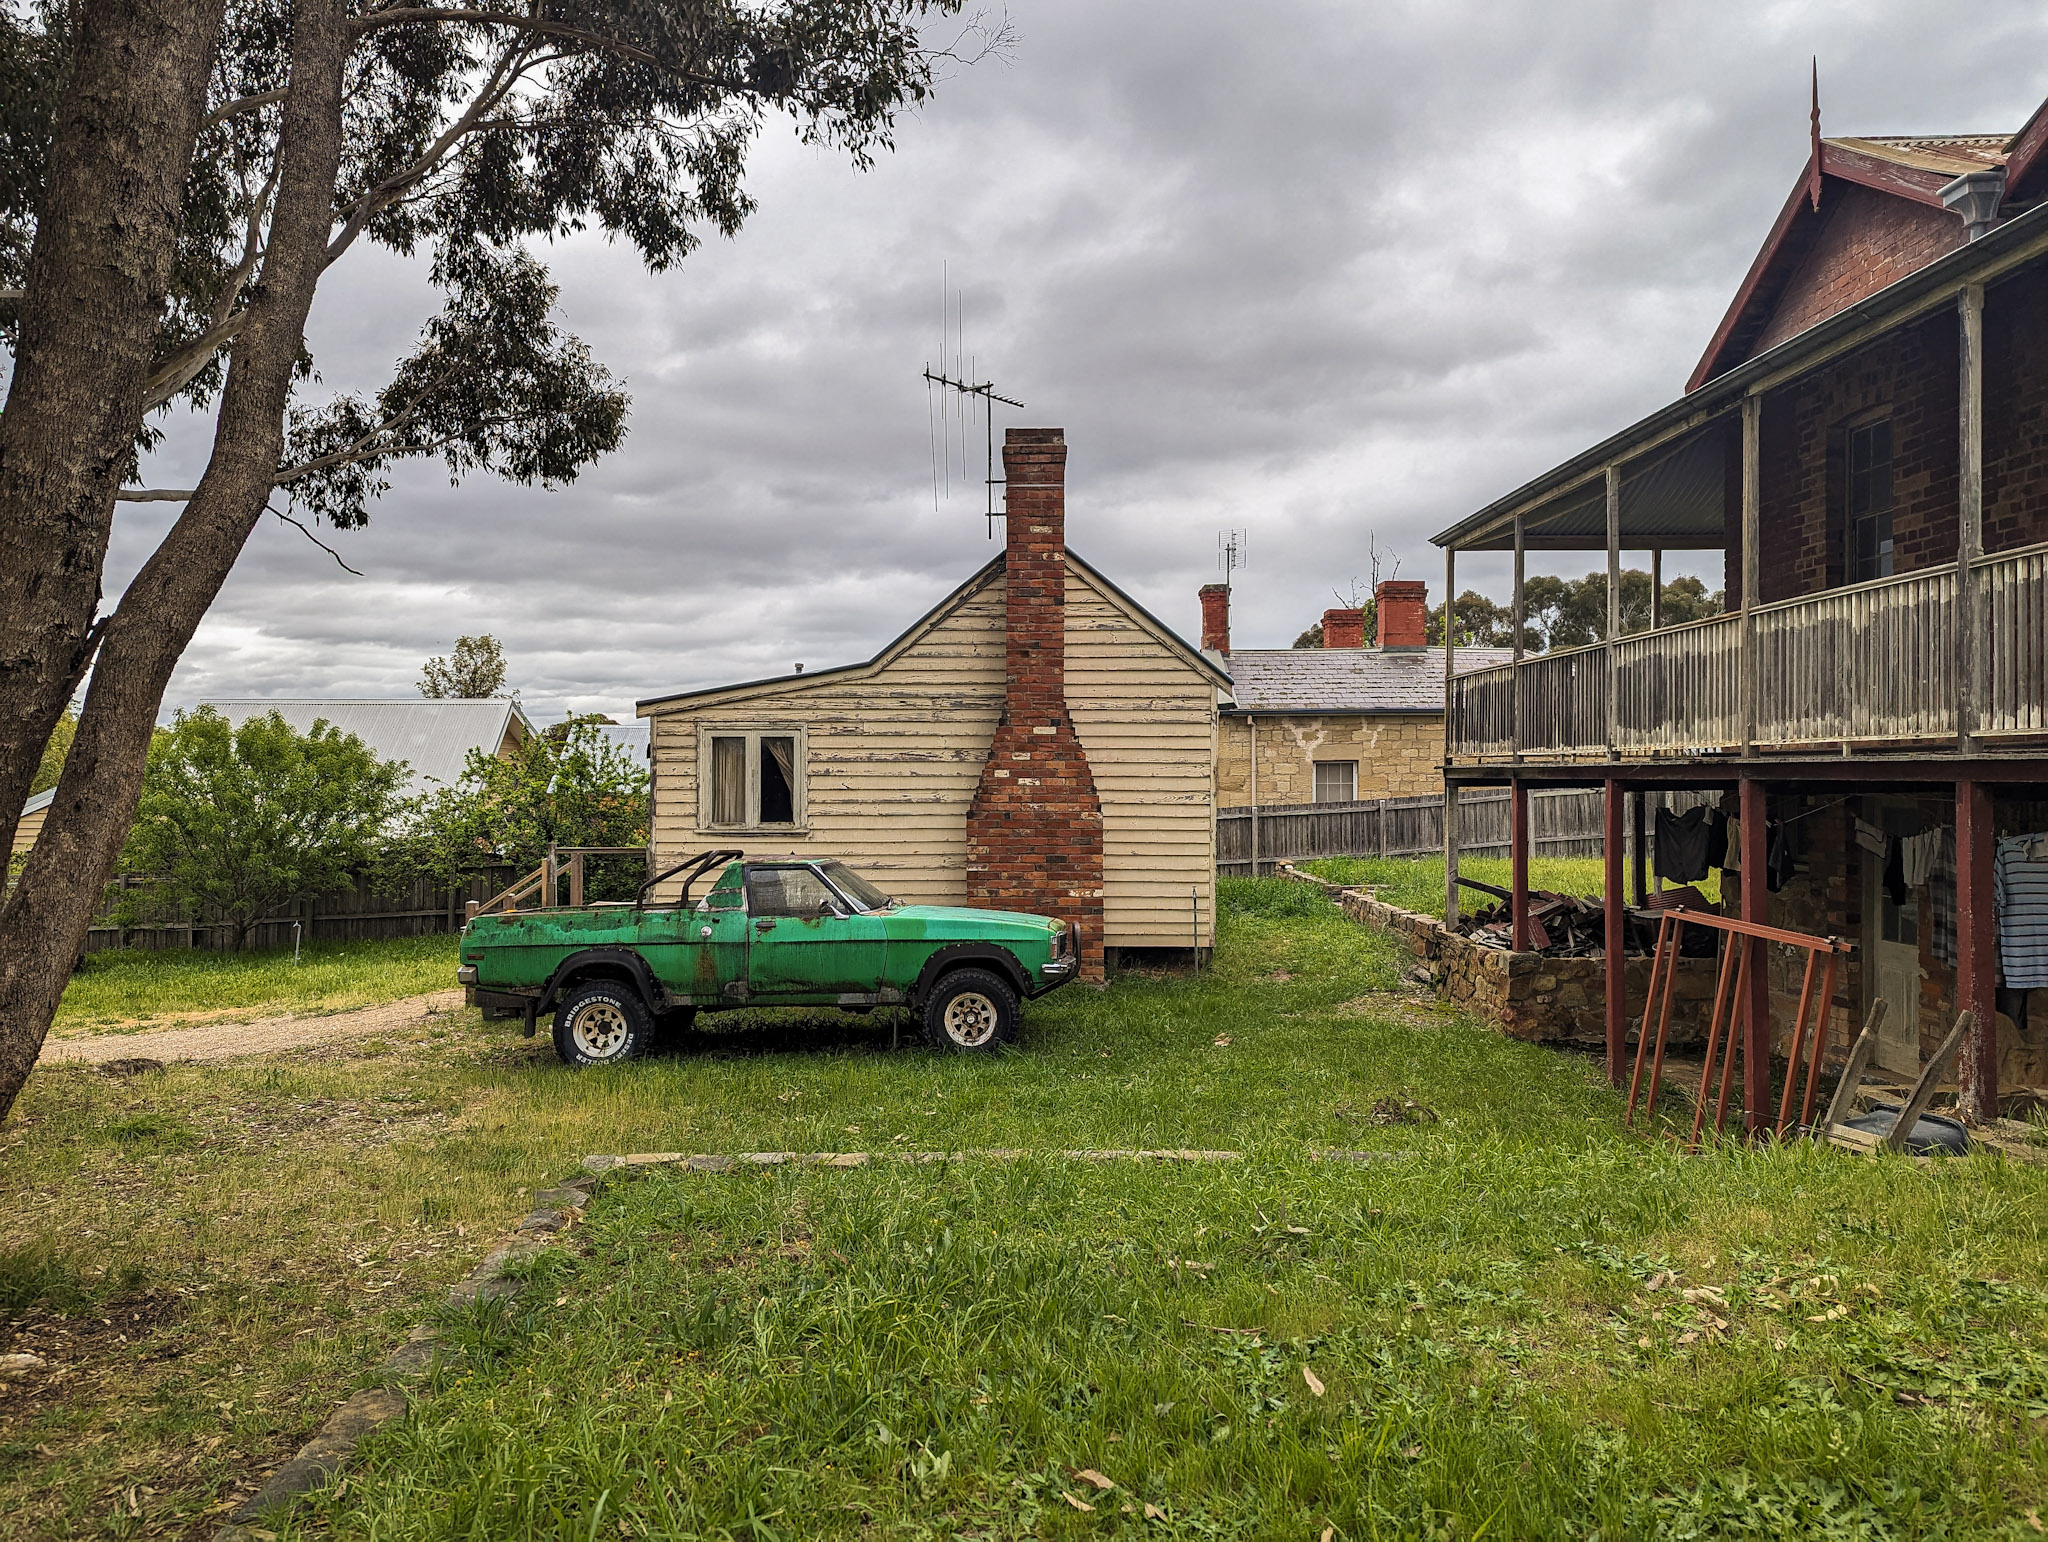 Cottage and 4WD holden